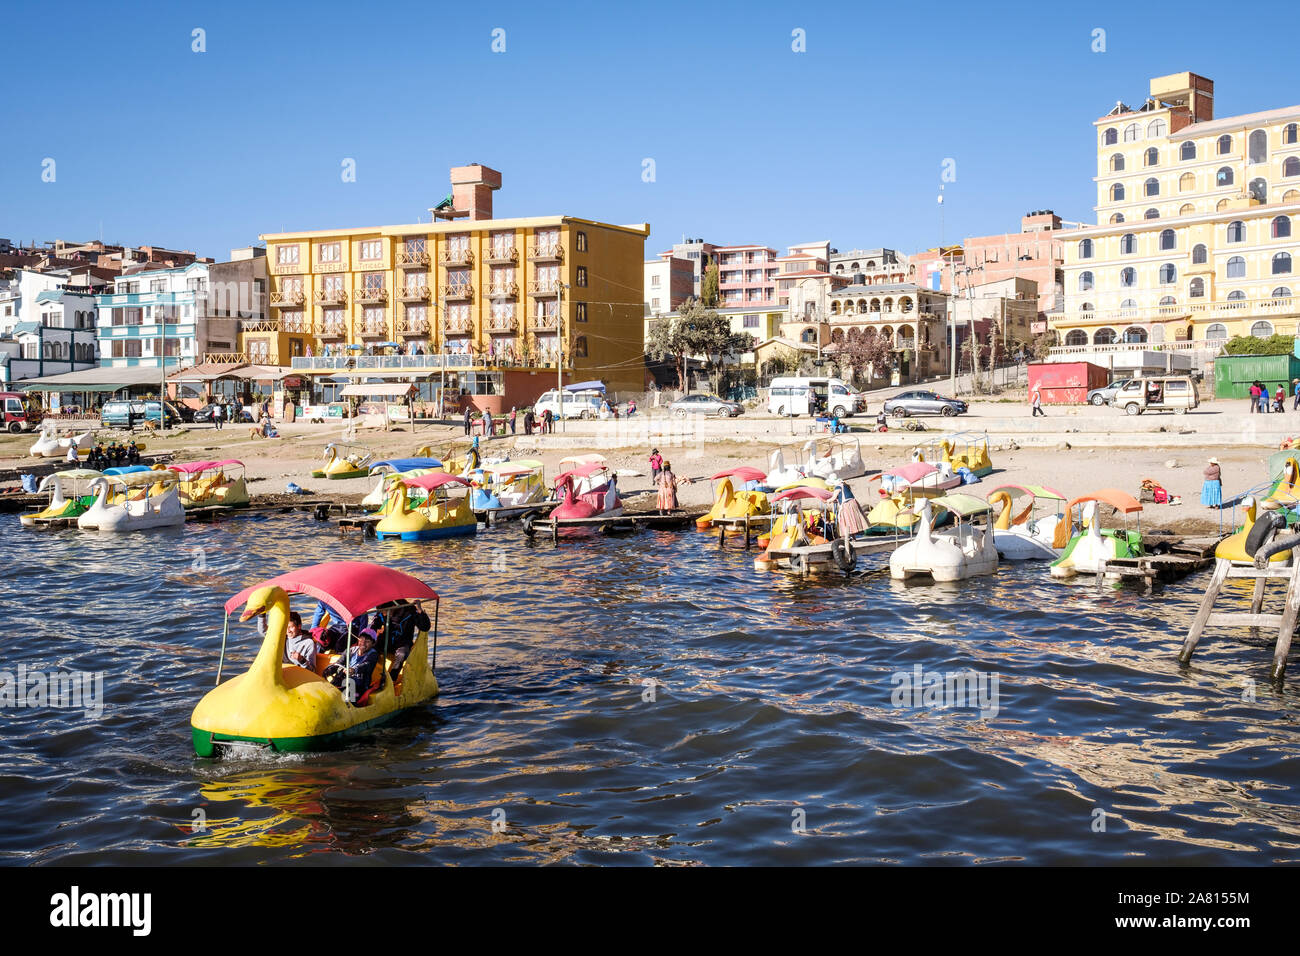 Local people riding on a duck-shaped boat in Copacabana beach, Bolivia Stock Photo